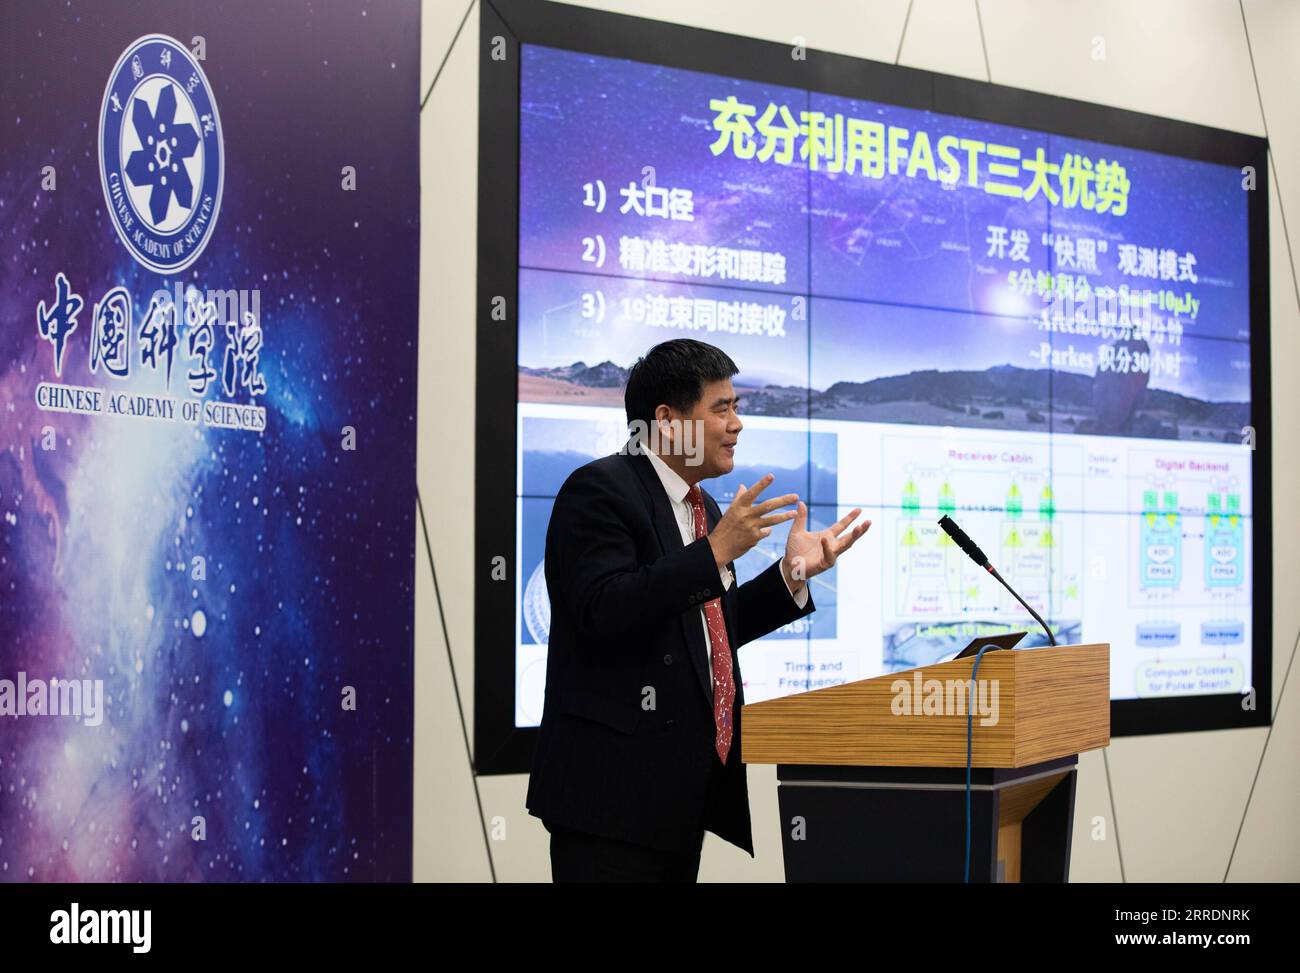 220106 -- BEIJING, Jan. 6, 2022 -- Han Jinlin, an expert with the National Astronomical Observatories of China NAOC of the Chinese Academy of Sciences, speaks at a press conference held in Beijing, capital of China, Jan. 5, 2022. TO GO WITH China s FAST telescope detects coherent interstellar magnetic field  EyesonSciCHINA-FAST TELESCOPE-STUDY-PROGRESS CN JinxLiwang PUBLICATIONxNOTxINxCHN Stock Photo